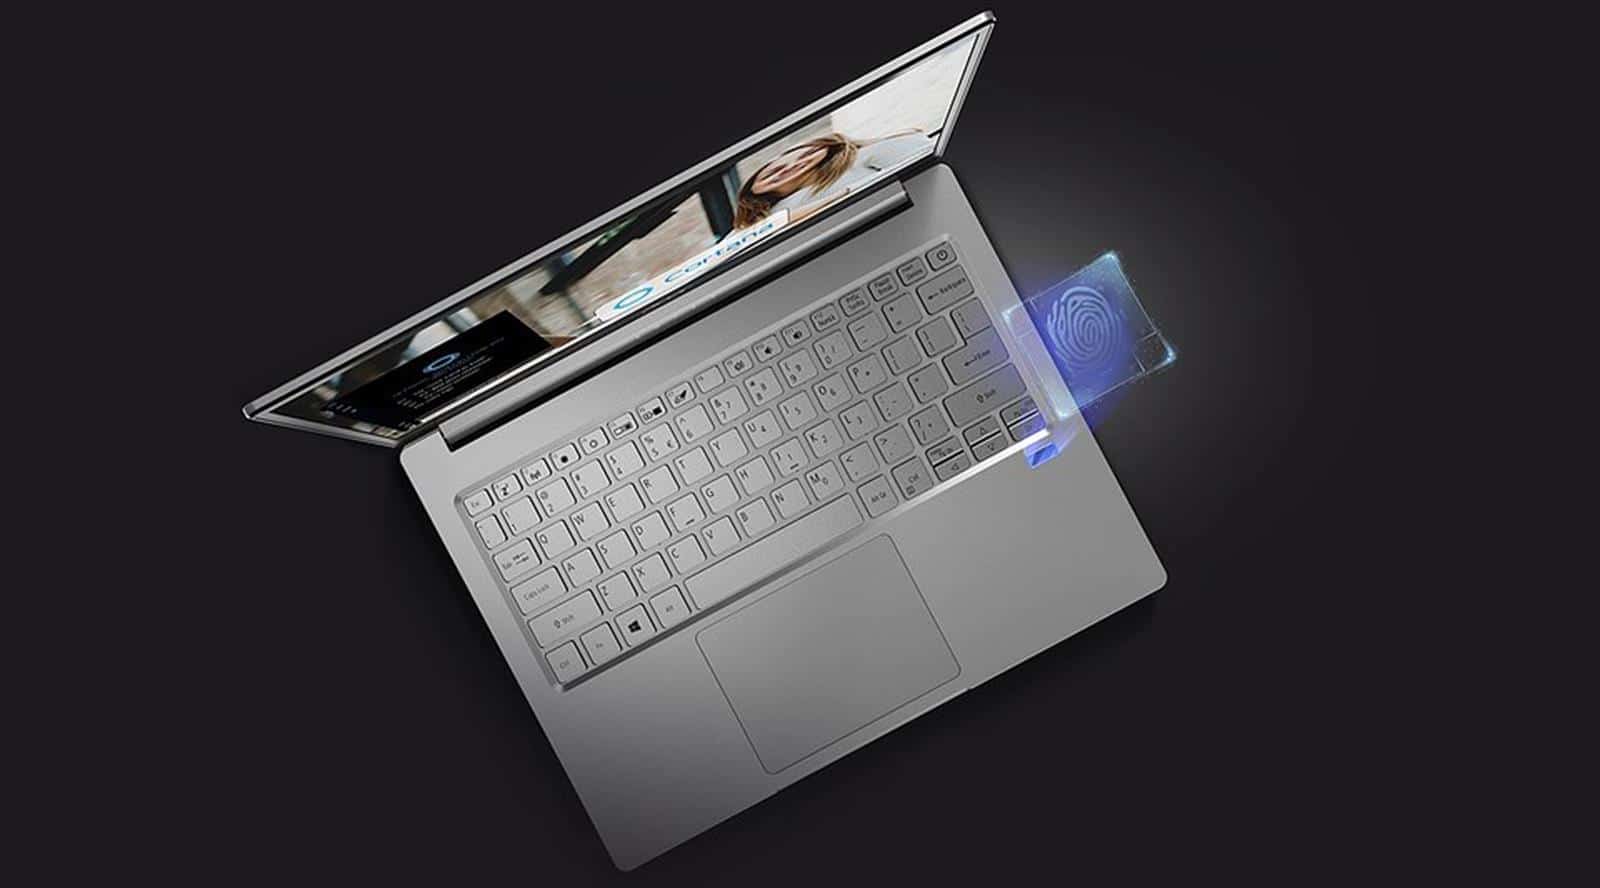 You can feel safer with Acer ultrabooks.  This is guaranteed by antibacterial coatings